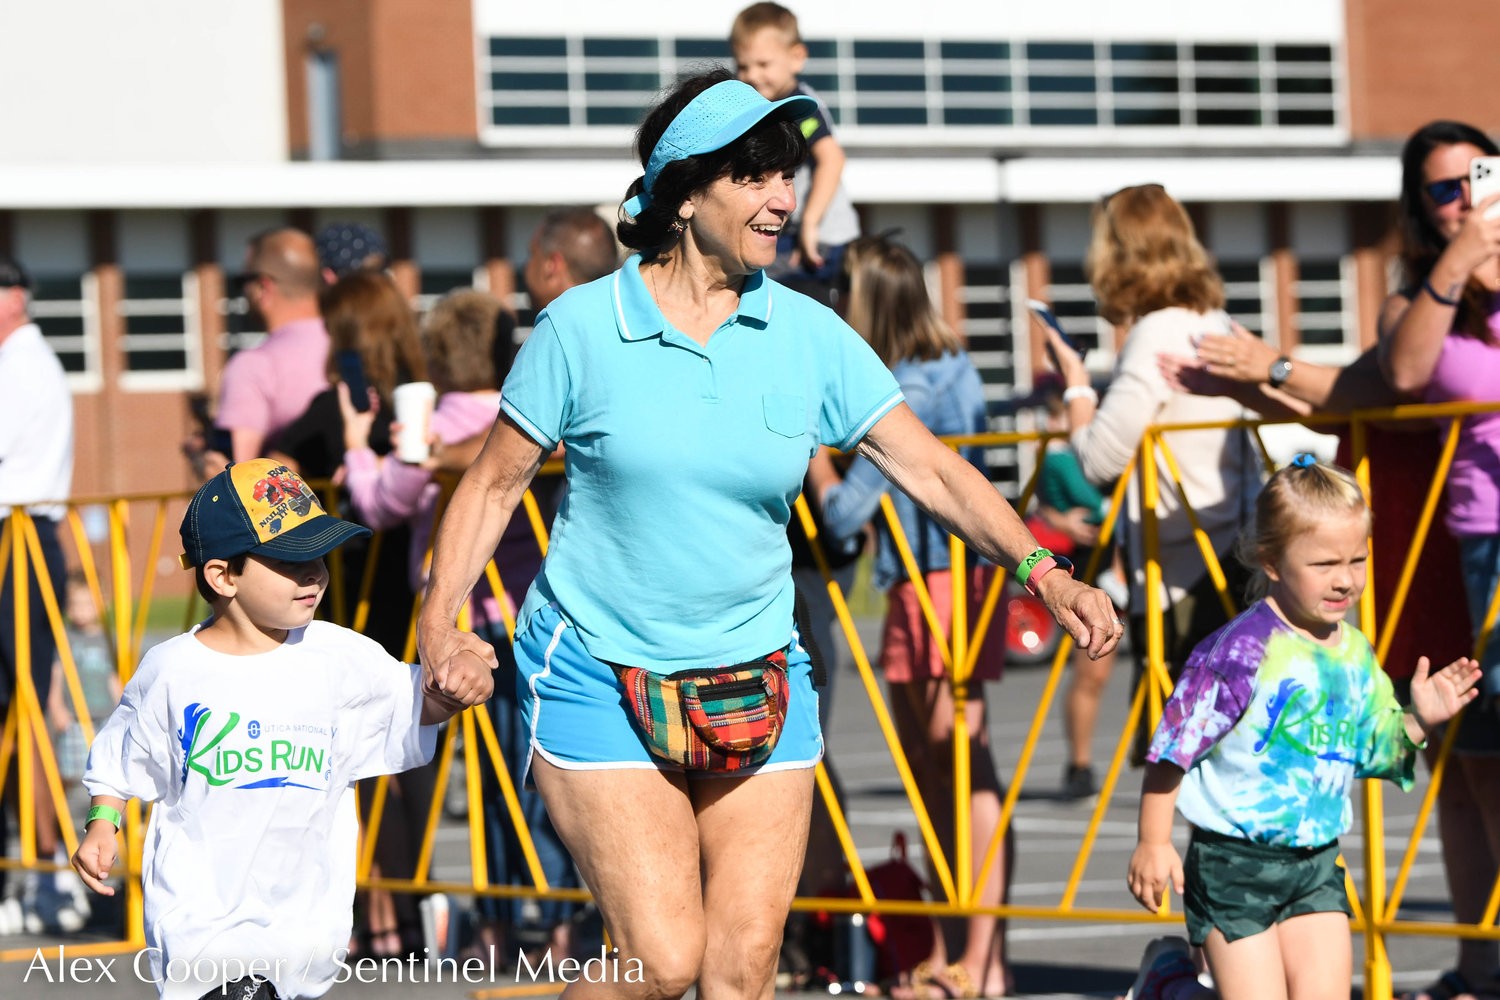 Children and their family members participate in the Utica National Kids Run at Mohawk Valley Community College in Utica on Saturday.